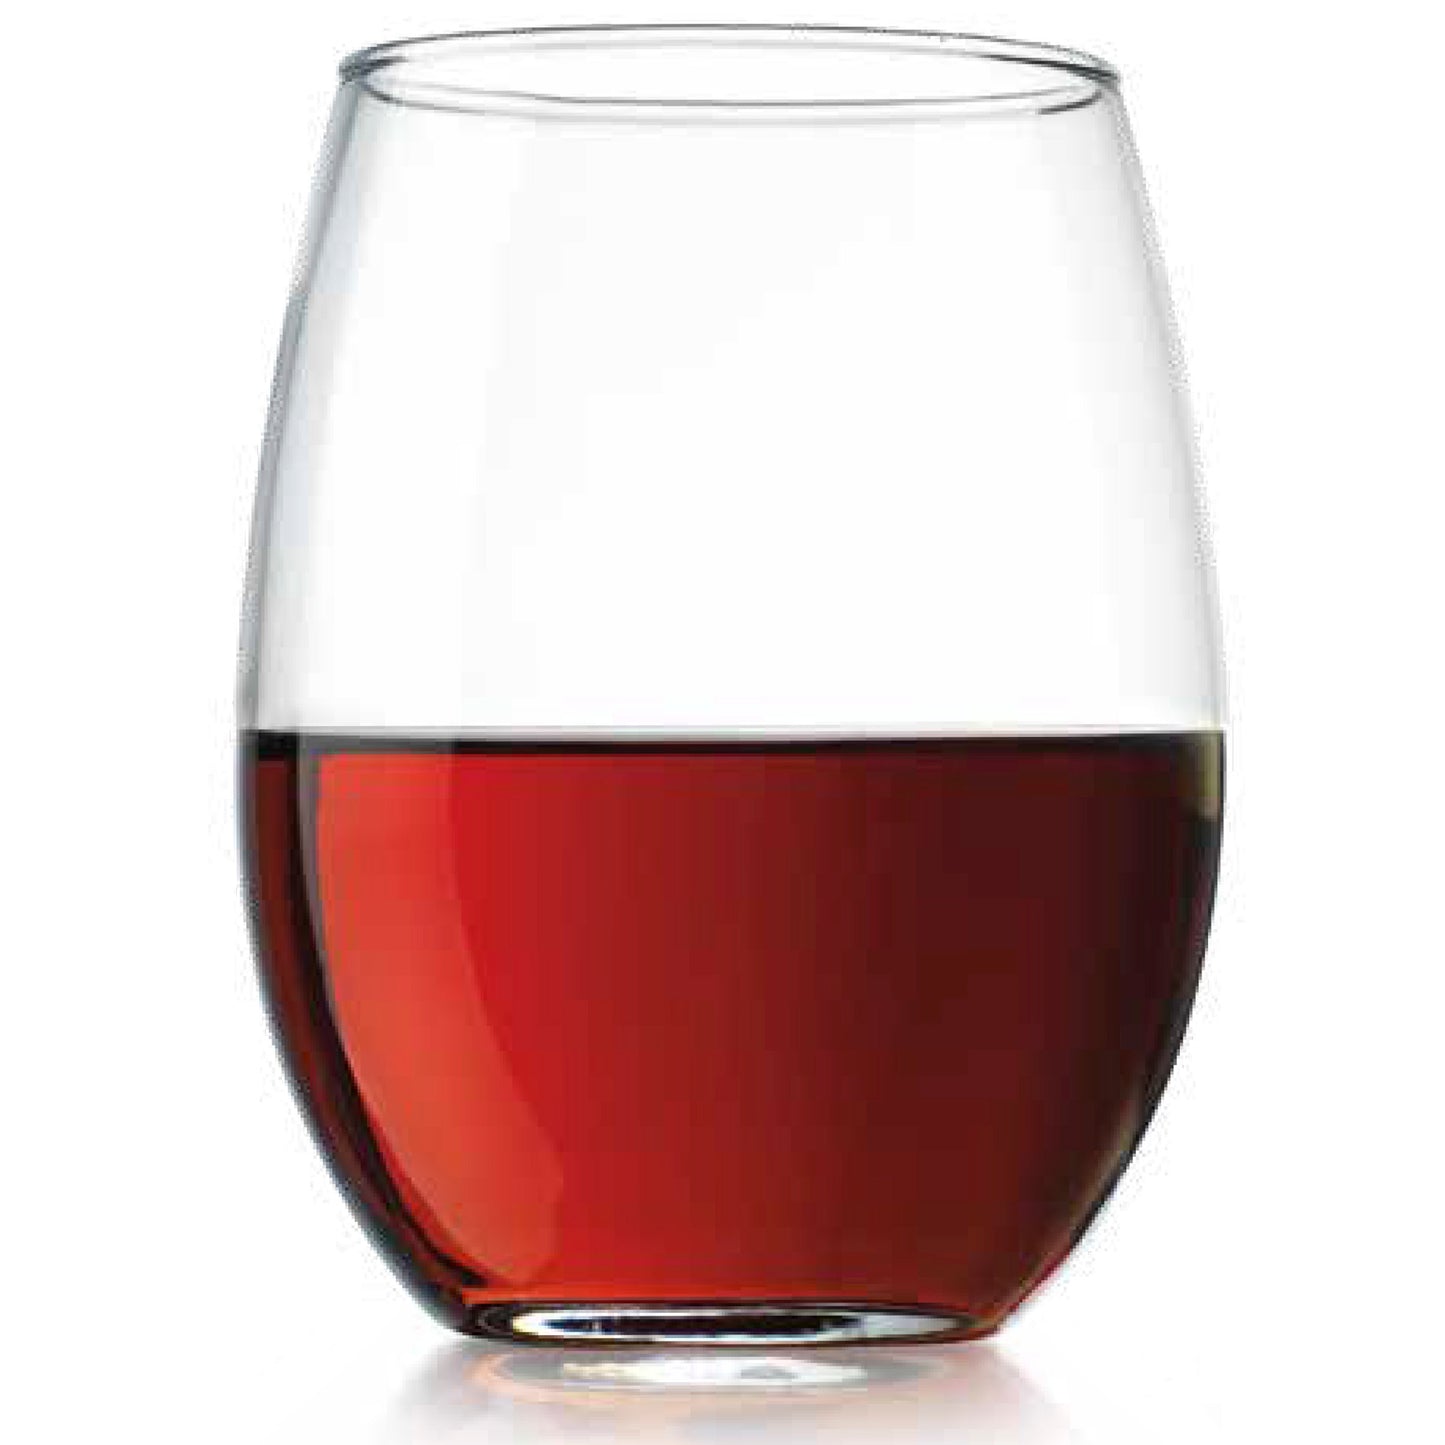 stemless wine glasses filled with wine on a white background